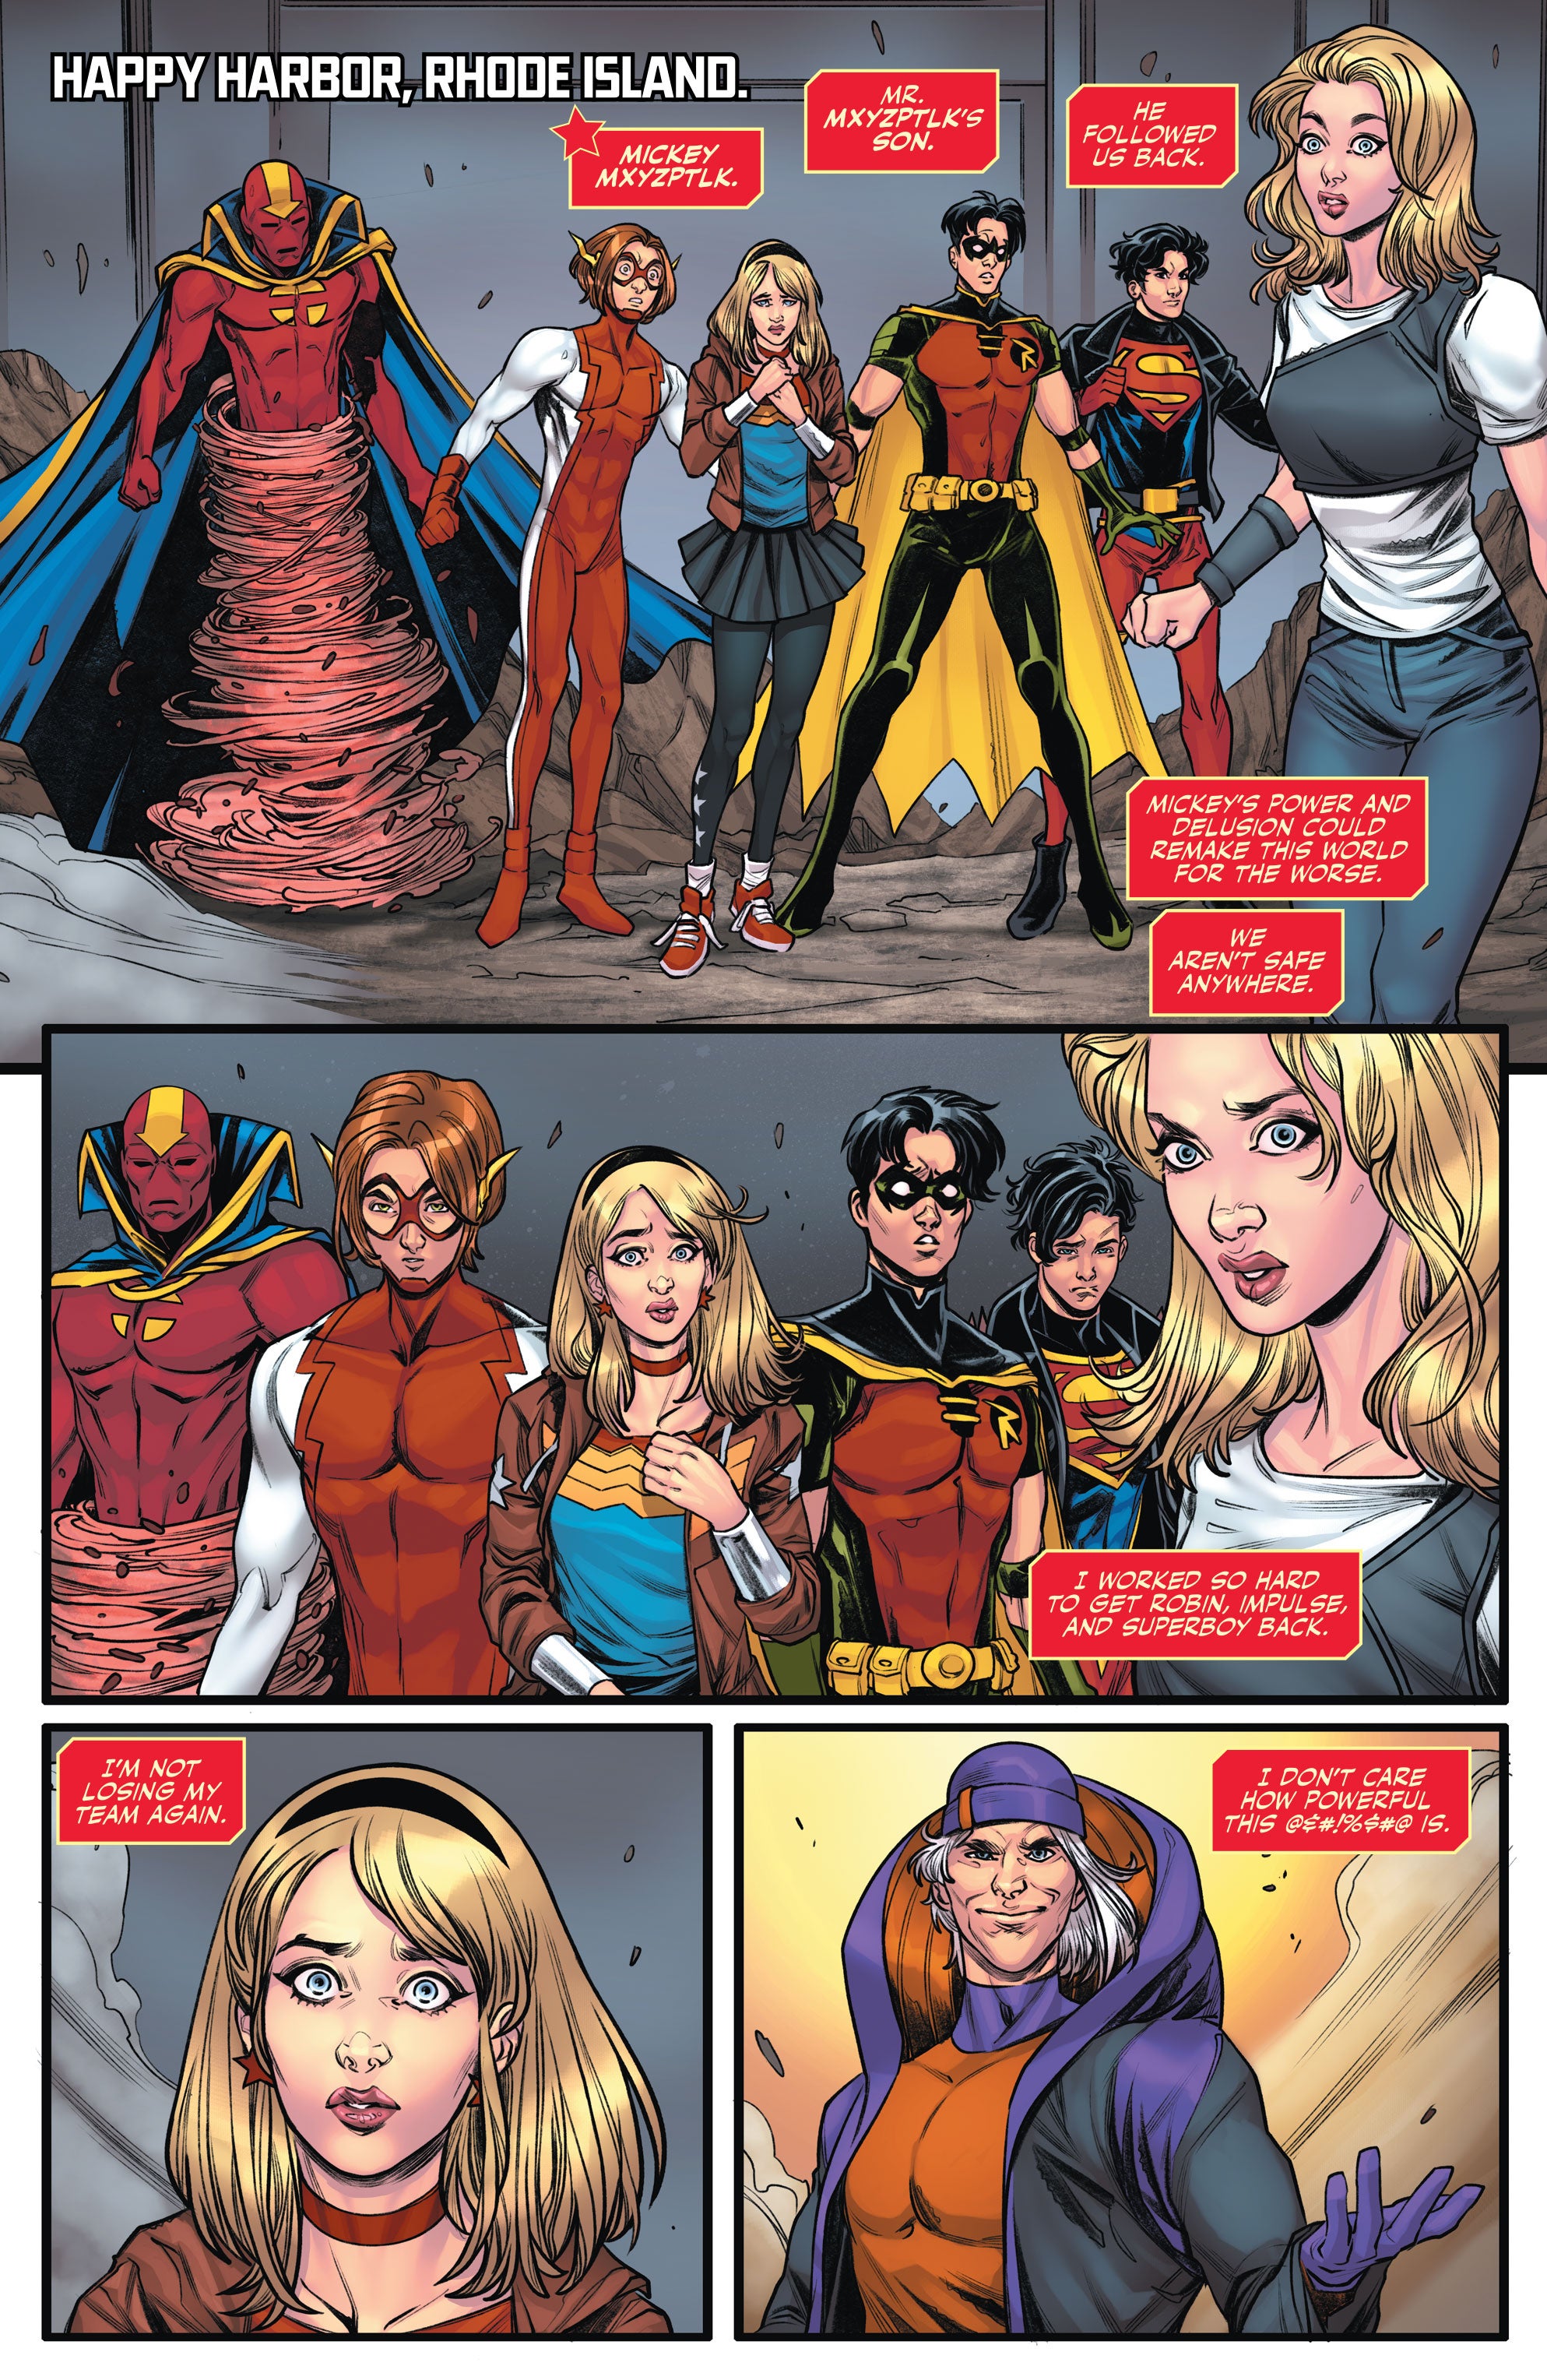 Internal comics page featuring the Young Justice team